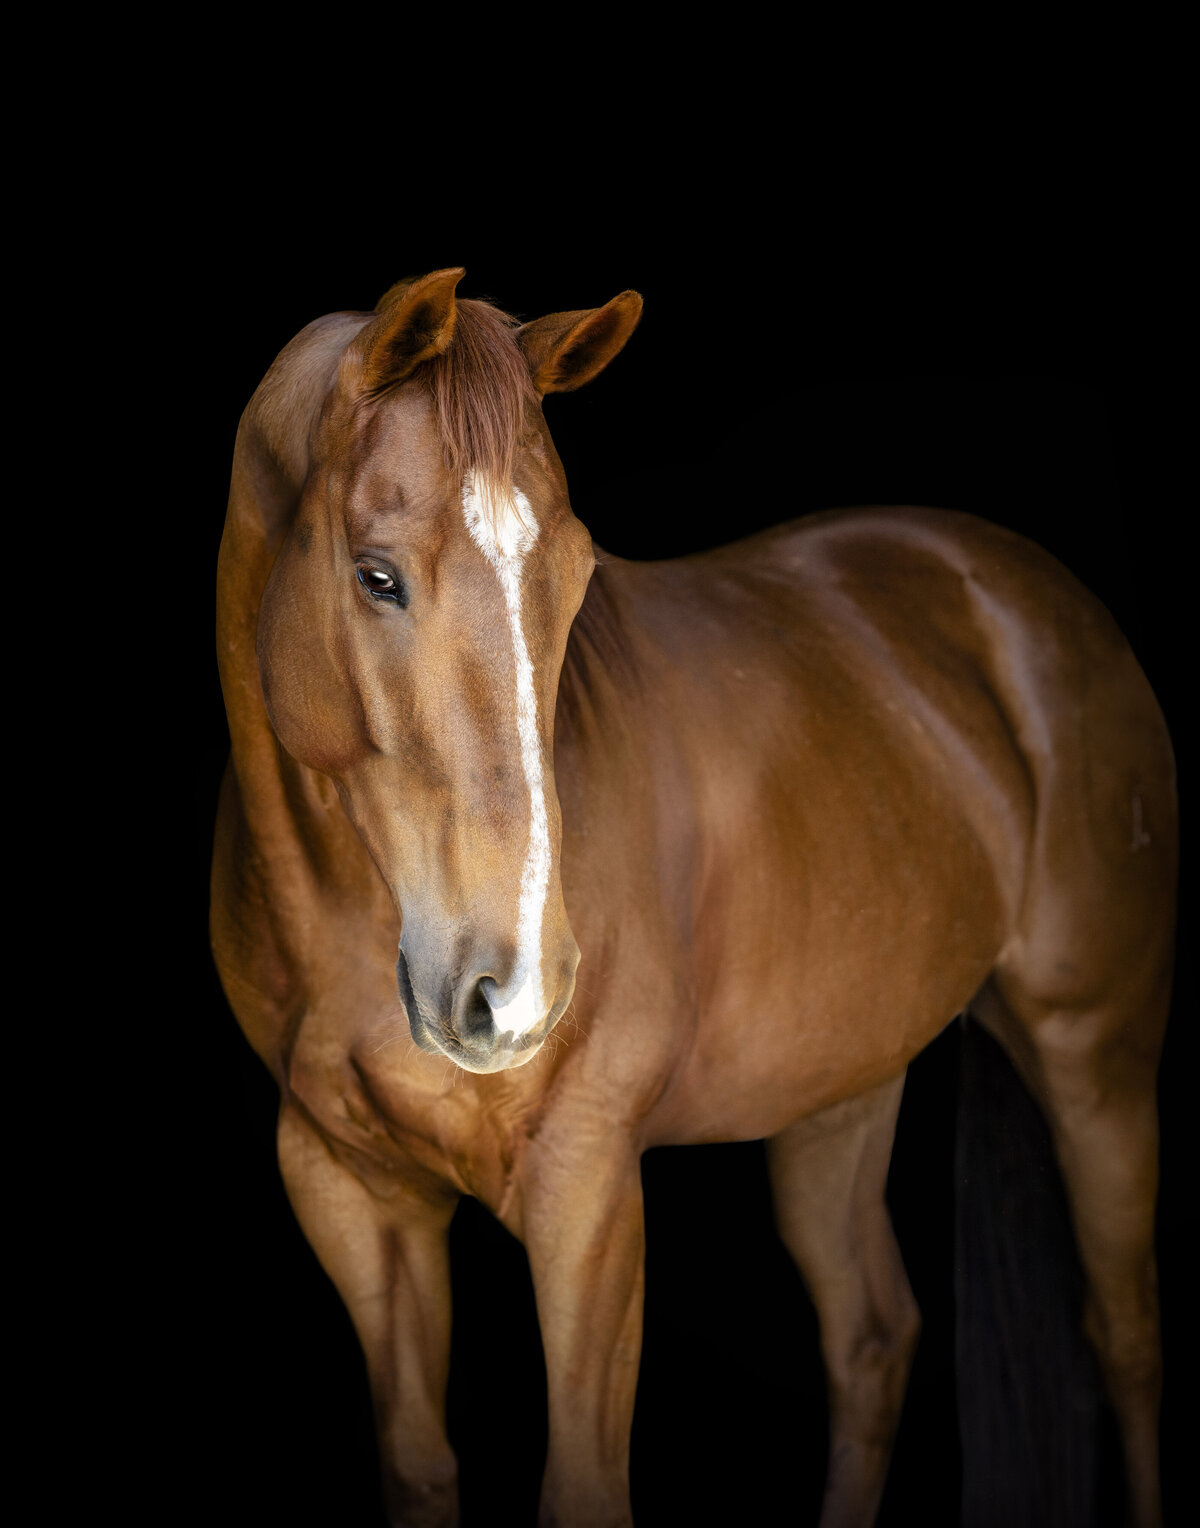 Tuscaloosa Equine Photographer showing off her black background fine art photos with this barrel racing beauty.